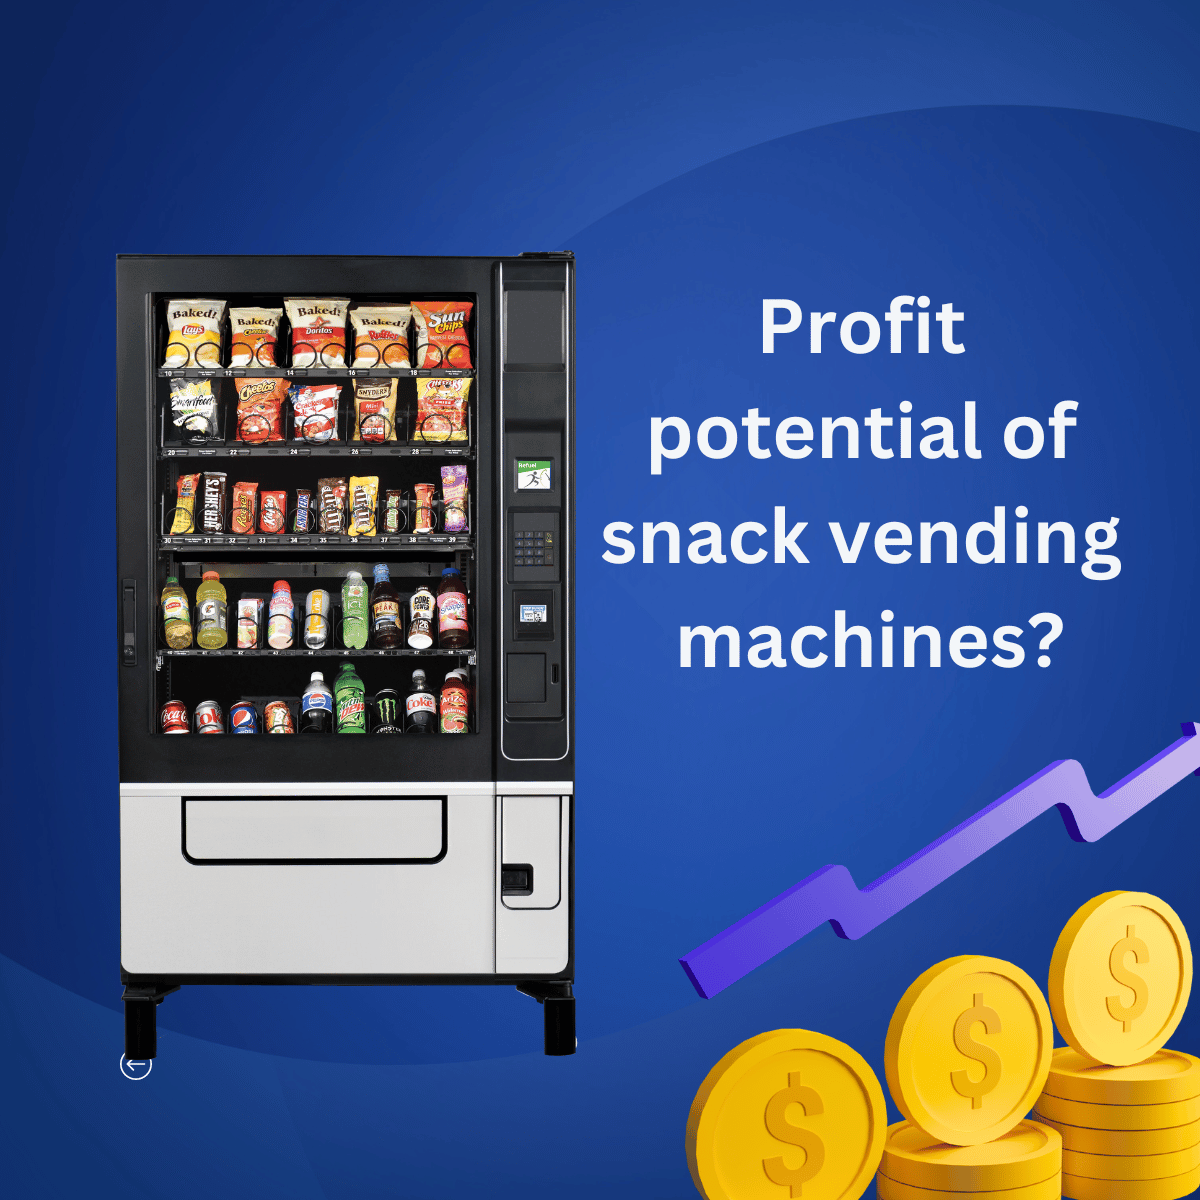 CAN YOU REALLY MAKE MONEY WITH SNACK VENDING MACHINES?